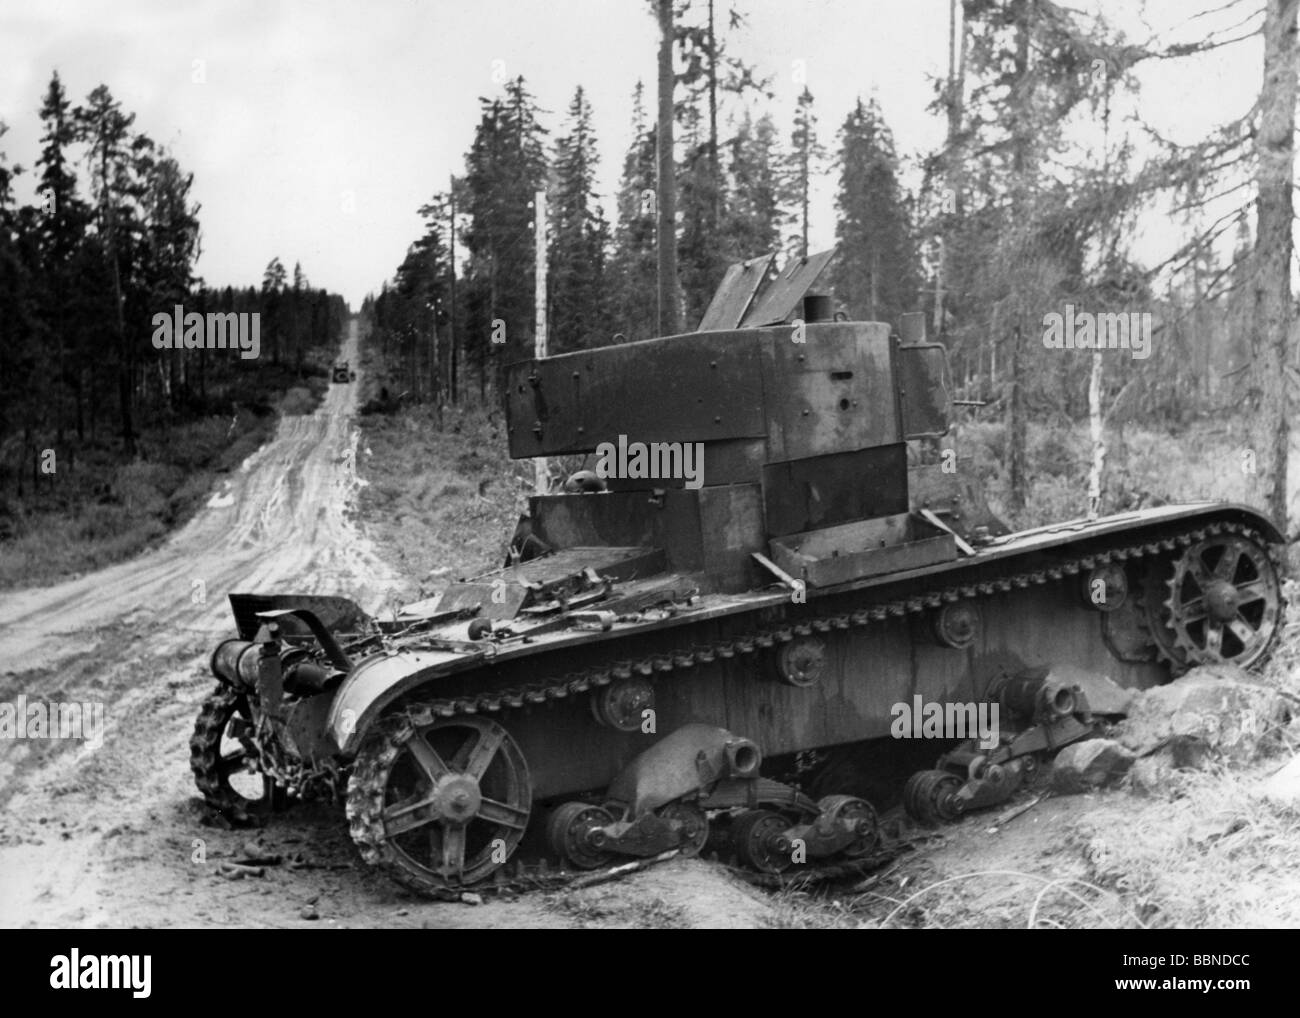 events, Second World War / WWII, Finland, knocked out Soviet light tank T-26, probably 1941, tanks, 20th century, destroyed, USSR, Soviet Union, Russia, destruction, wreck, T 26, T26, historic, historical, Continuation War 1941 - 1944, 1940s, Stock Photo